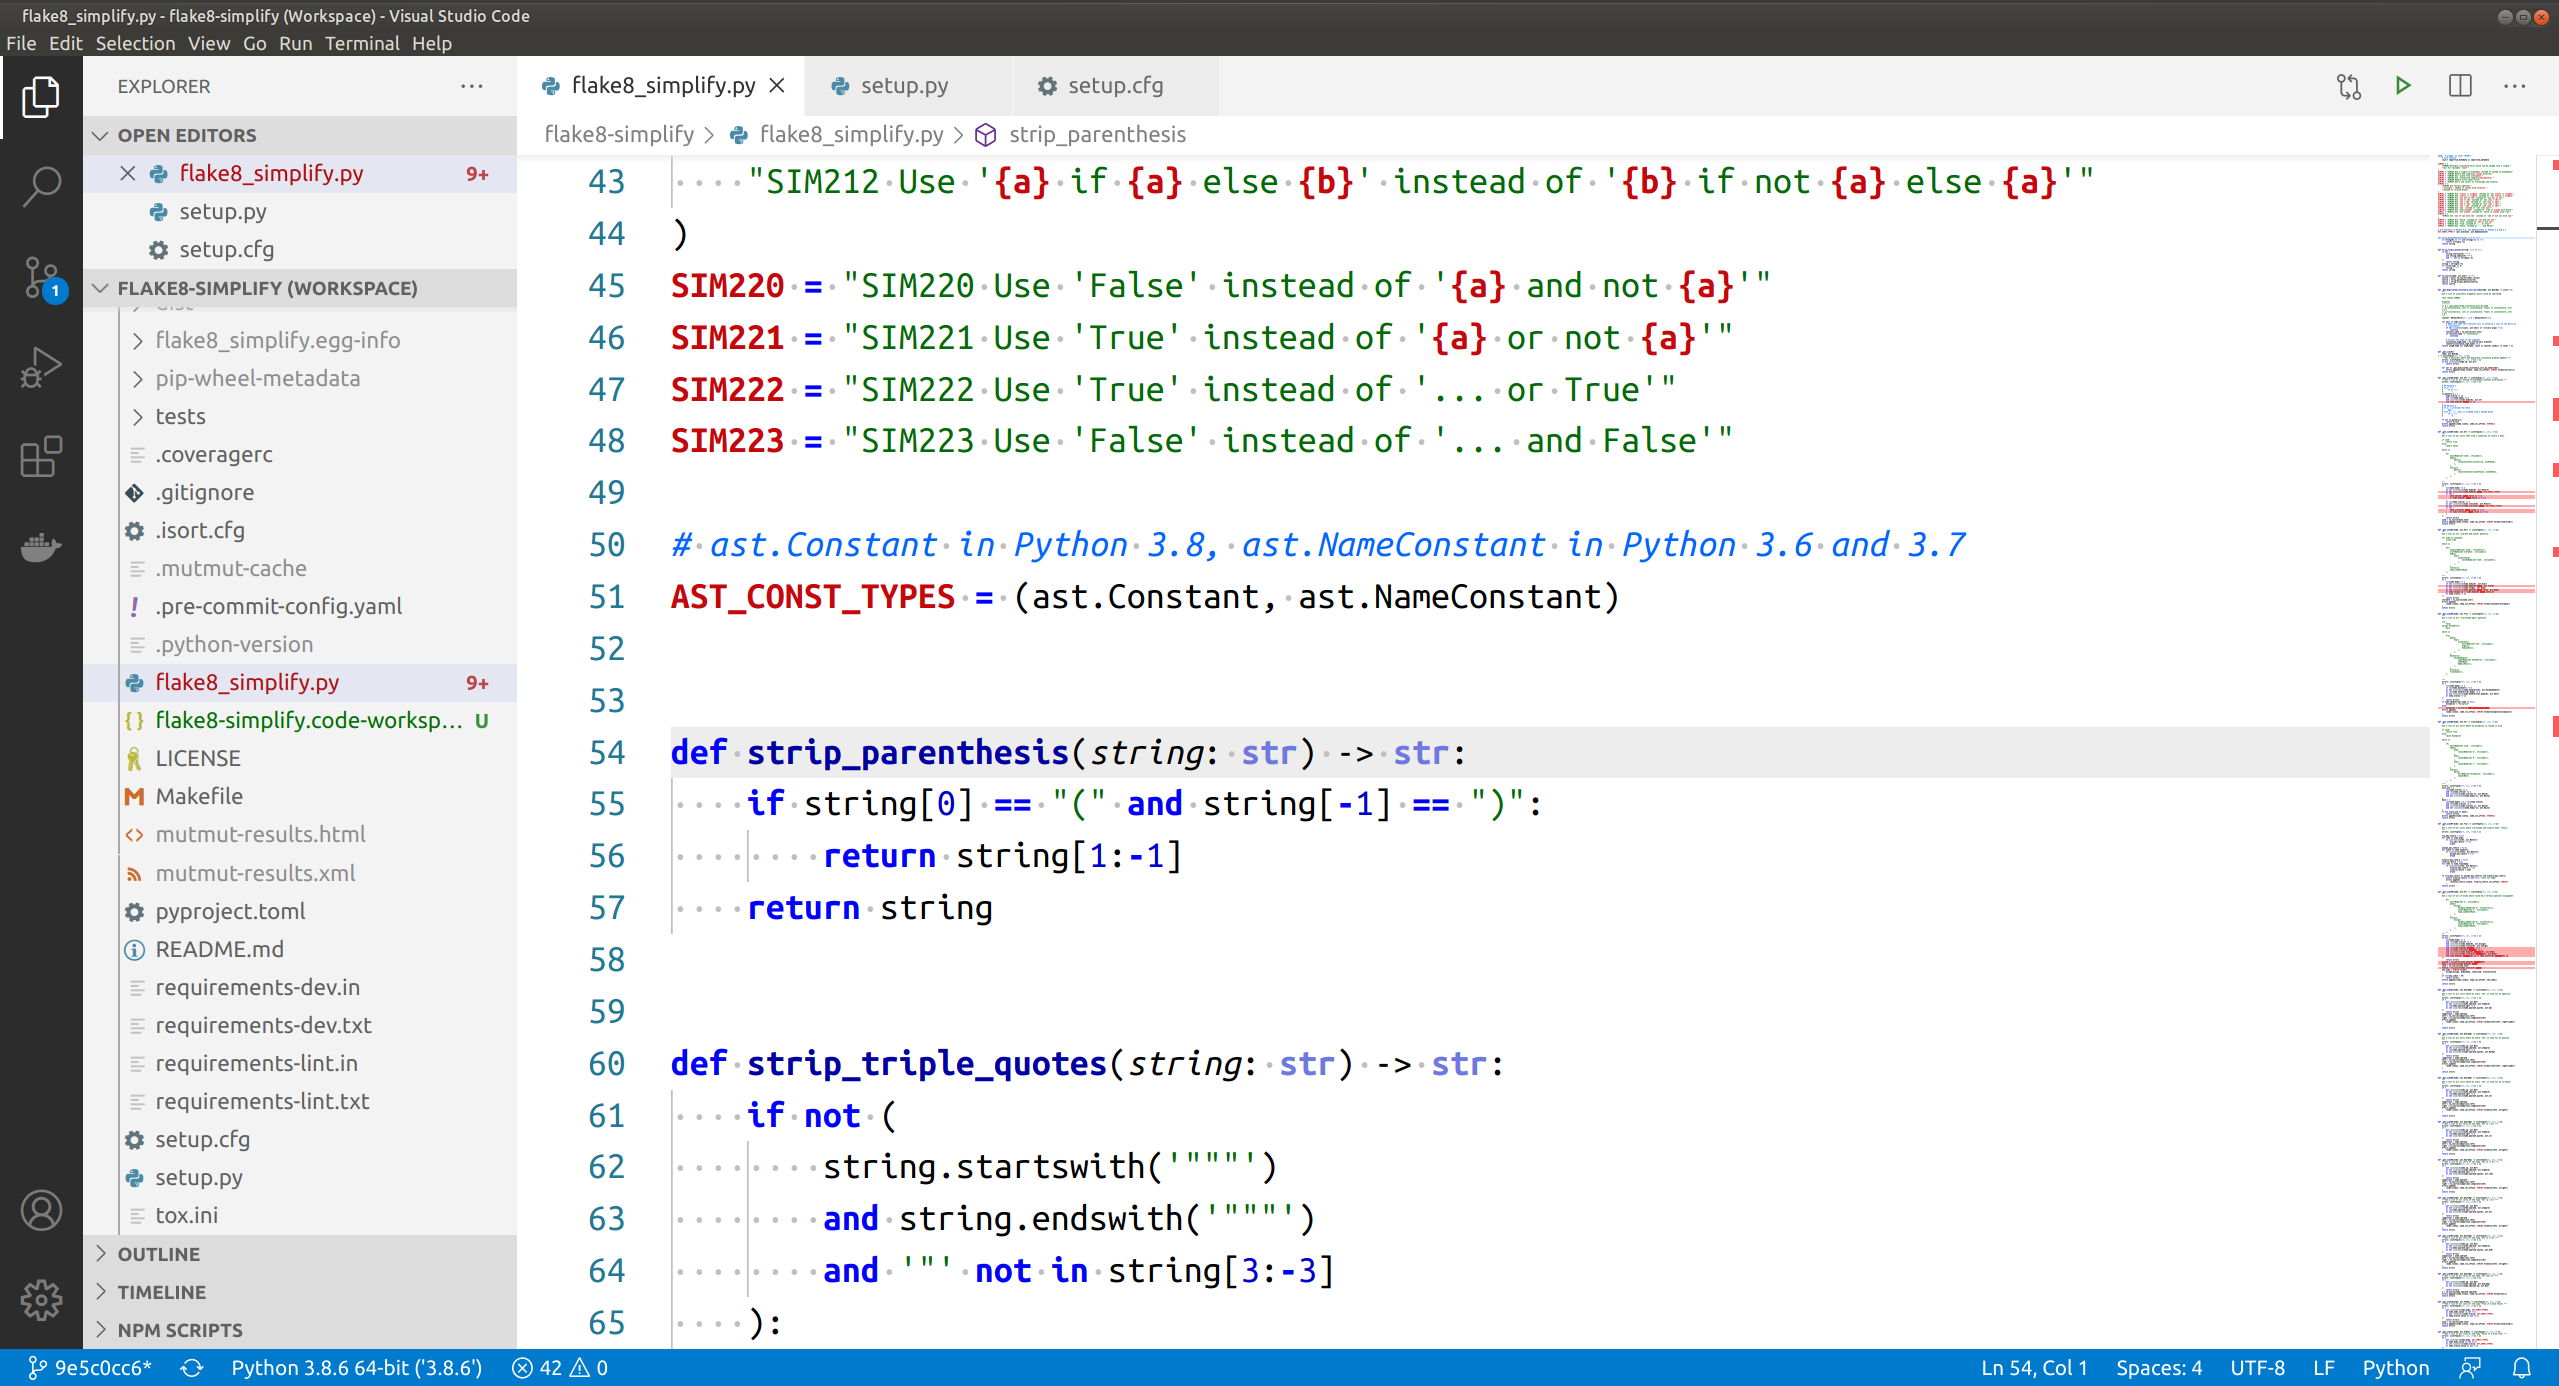 Visual Studio: IDE and Code Editor for Software Developers and Teams